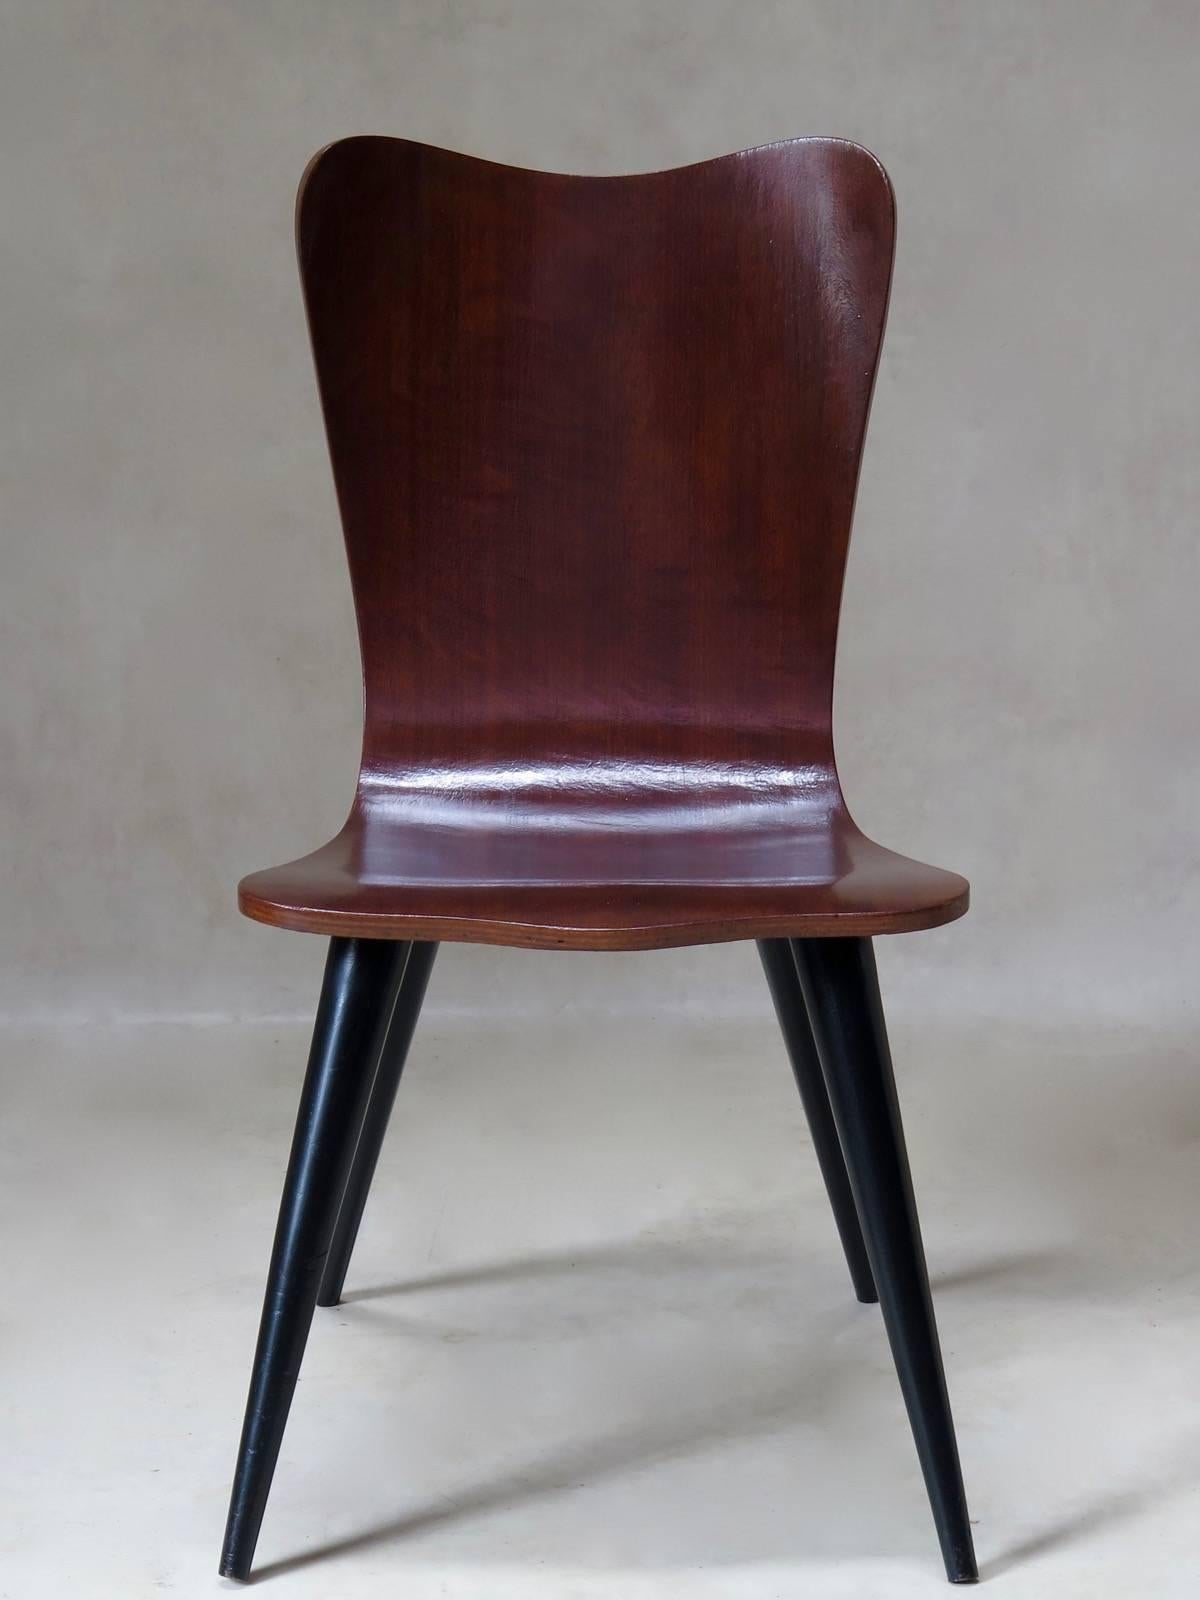 Set of six dining chairs with great allure, from the two tones of wood to the exaggeratedly tapered and splayed legs.